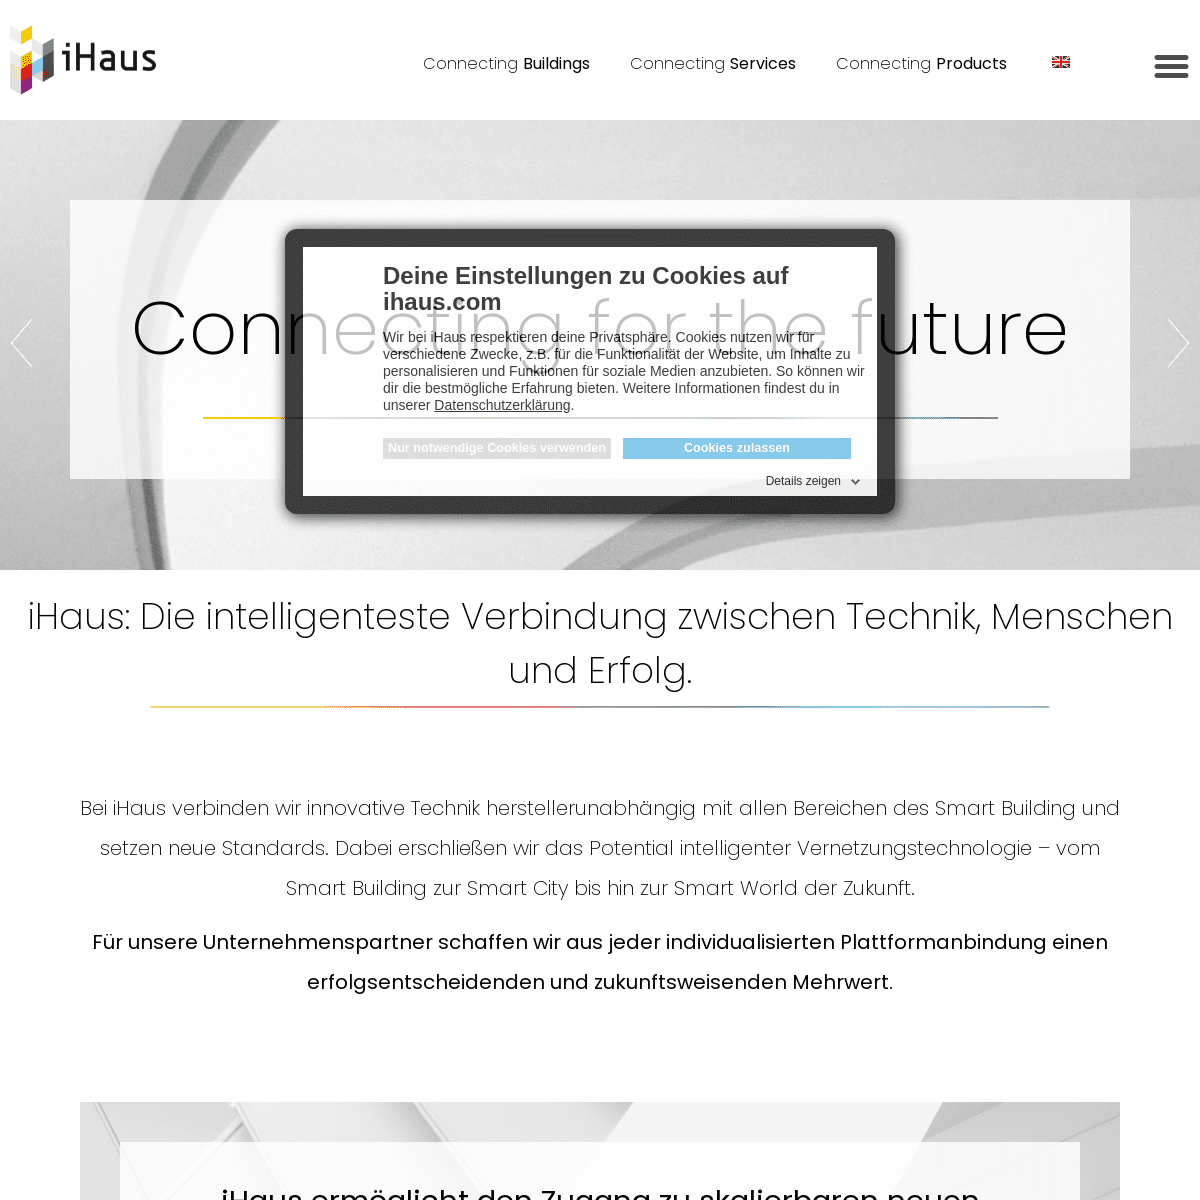 A complete backup of https://ihaus.com